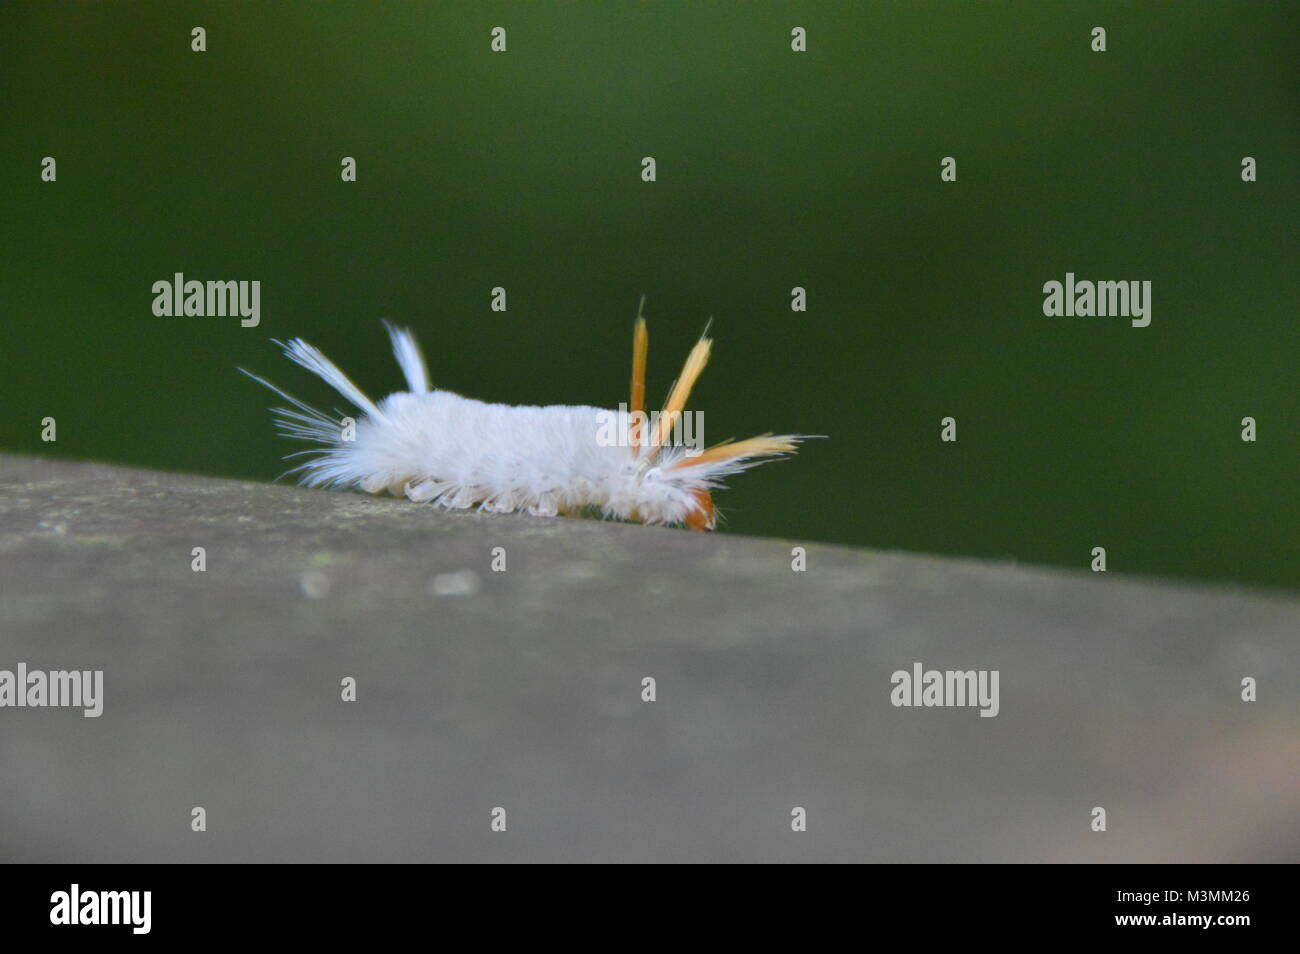 A white fussy caterpillar with yellow horns on it's head and white horns on it's tail. It is walking on a bridge, but you can not see the bridge. Stock Photo